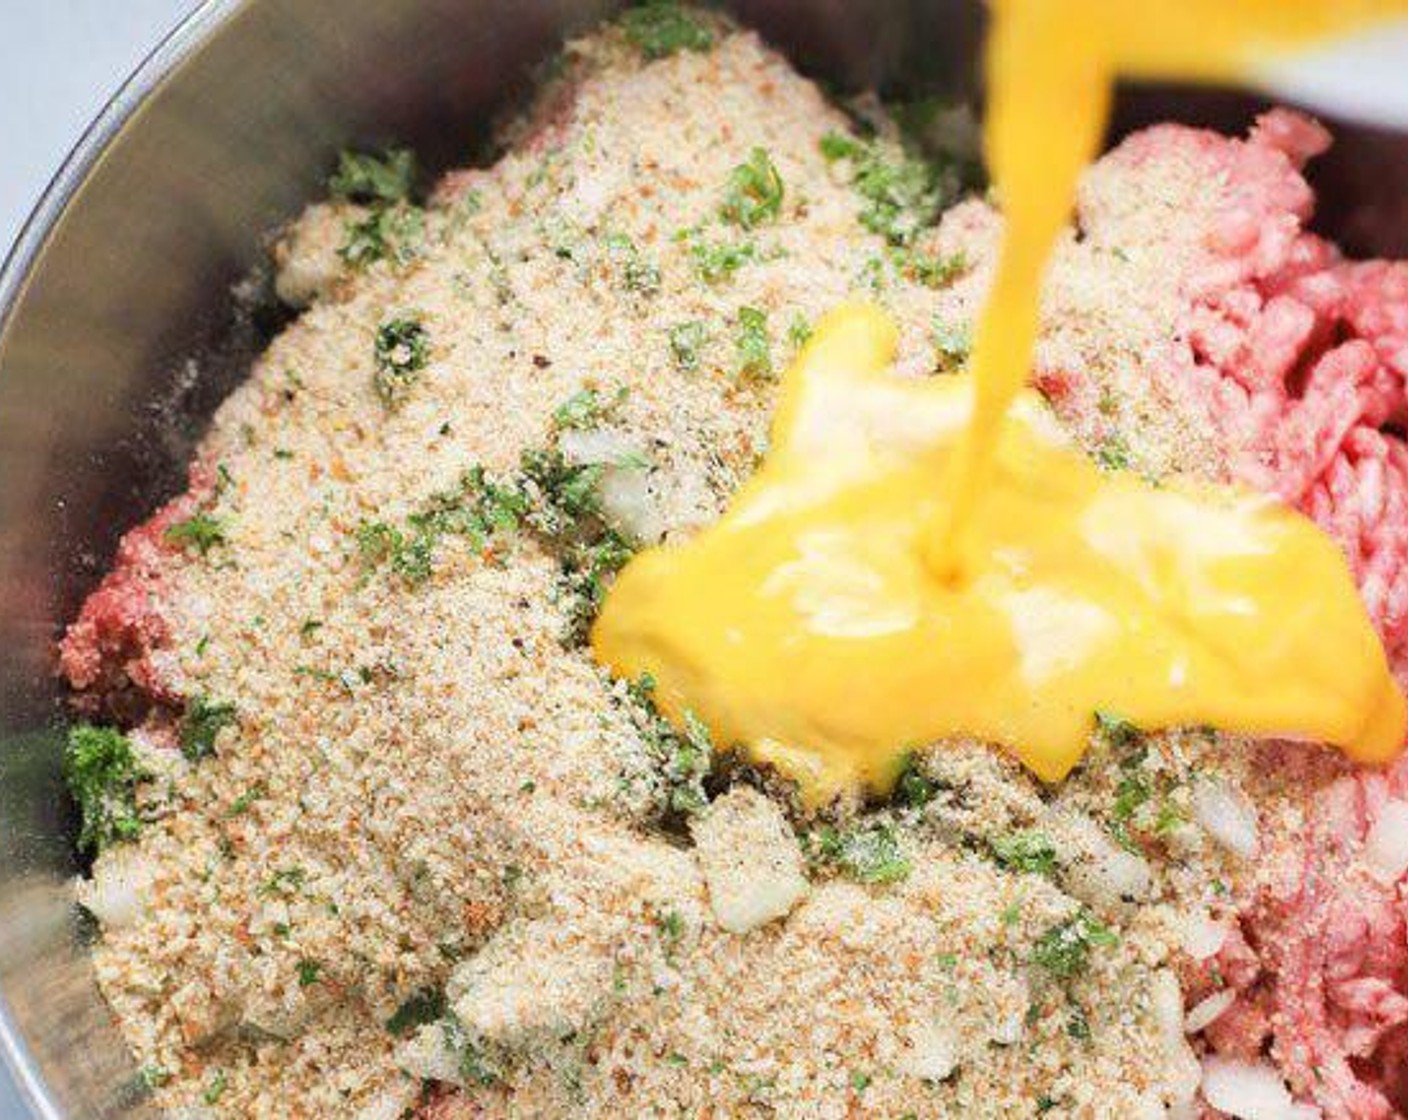 step 3 In a large bowl mix, the 85/15 Lean Ground Beef (1 lb), Ground Pork (1 lb), Onion (3/4 cup), Grated Parmesan Cheese (1/2 cup), Seasoned Breadcrumbs (1/2 cup), Fresh Parsley (2 Tbsp), Salt (1/2 Tbsp), Ground Black Pepper (1/2 tsp), and beaten eggs.